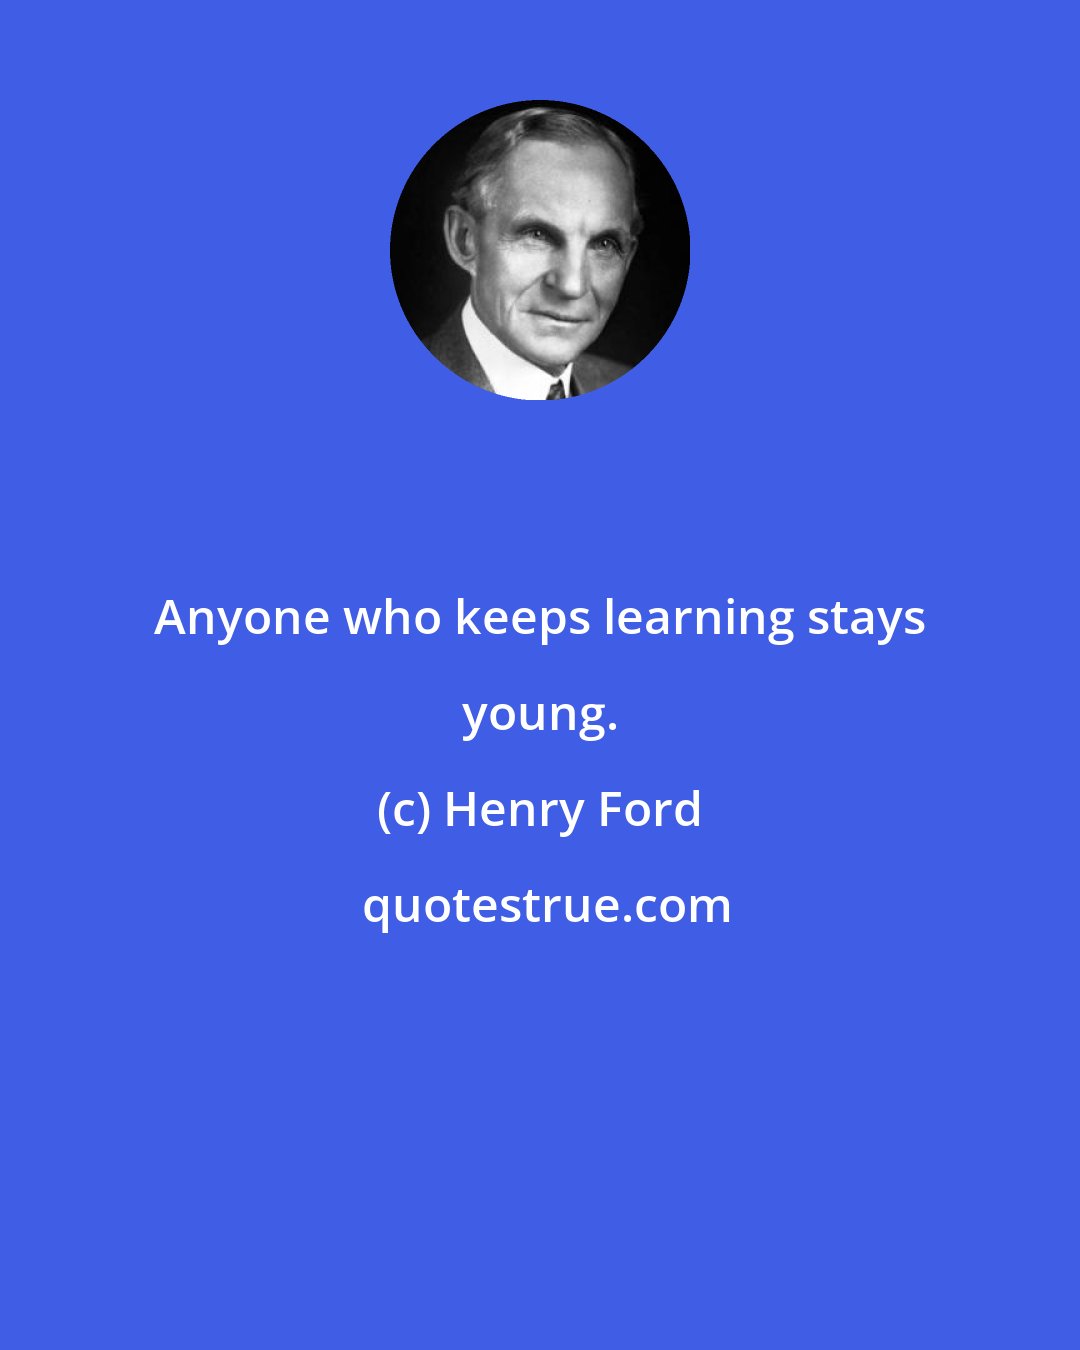 Henry Ford: Anyone who keeps learning stays young.